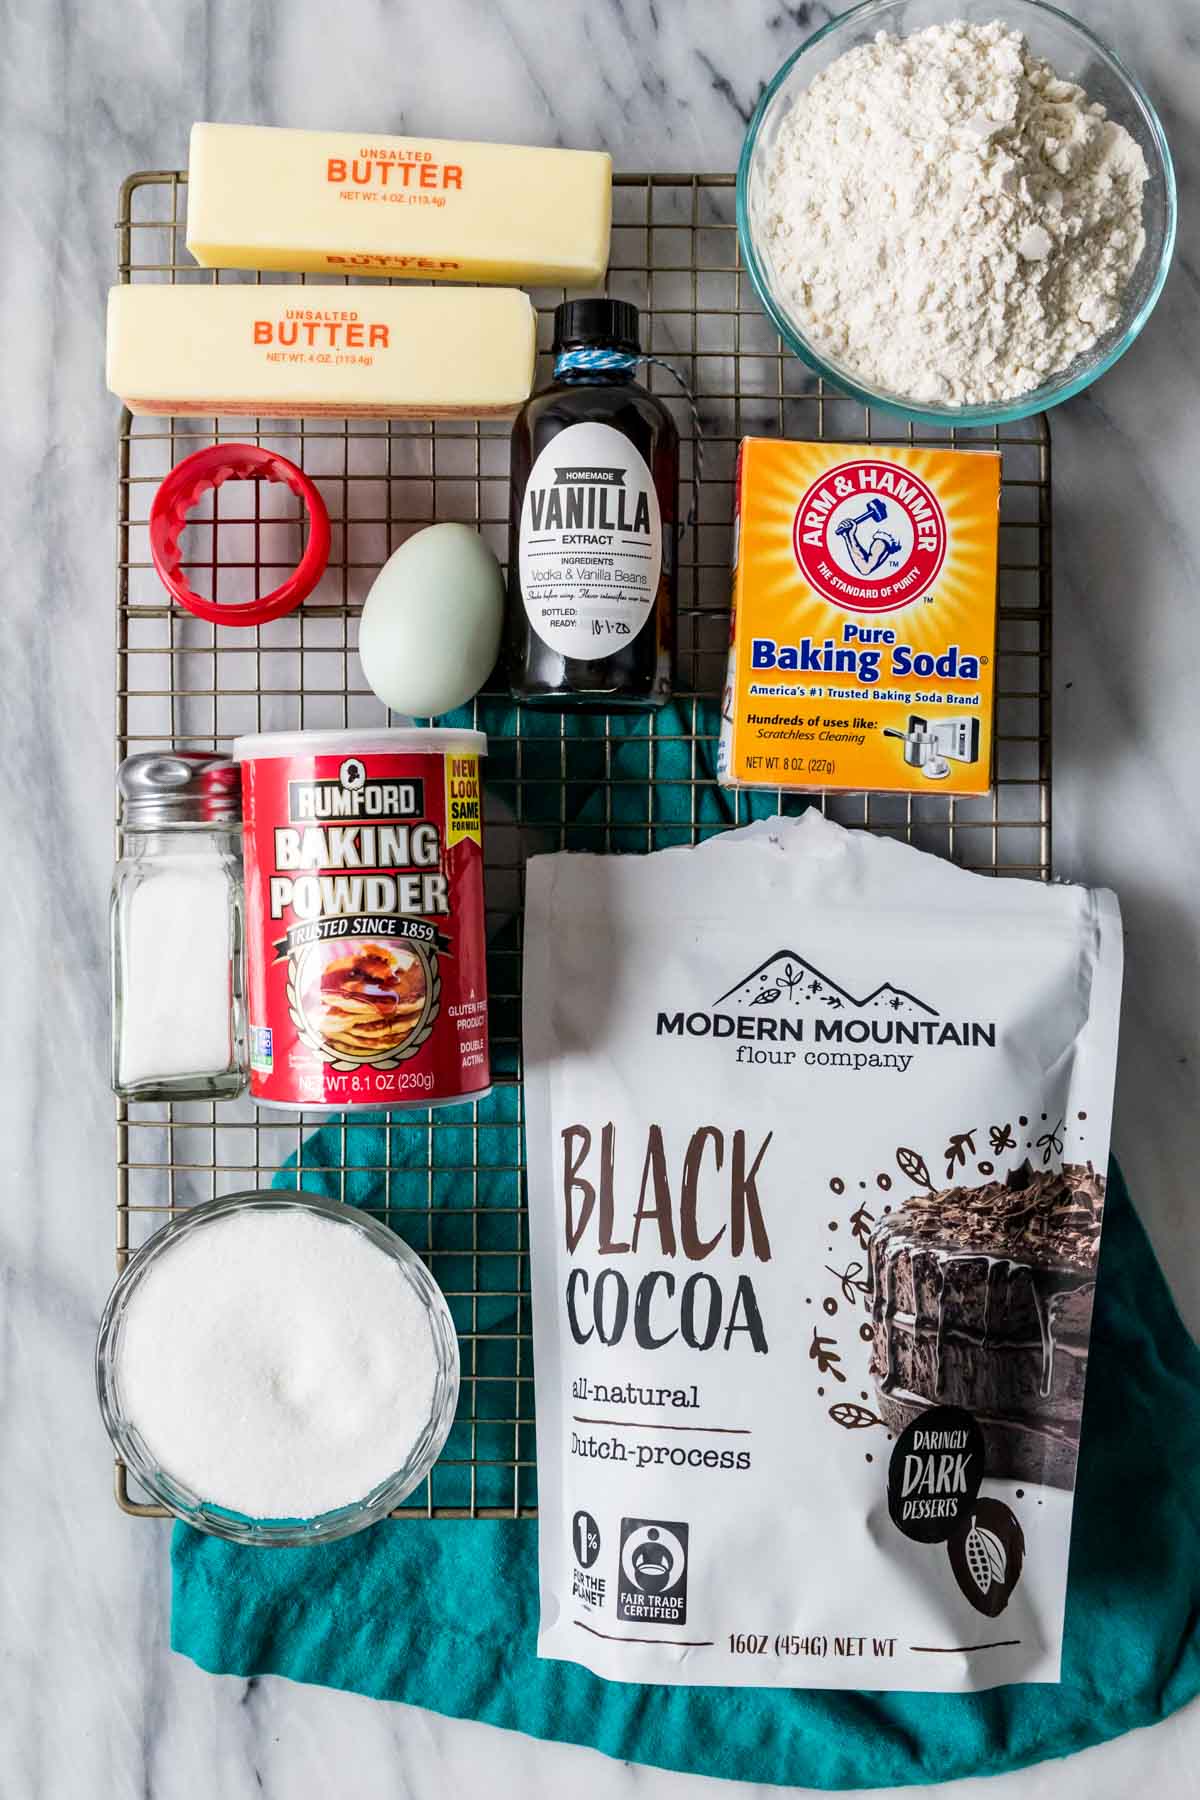 Overhead view of ingredients including black cocoa, butter, flour, and more.